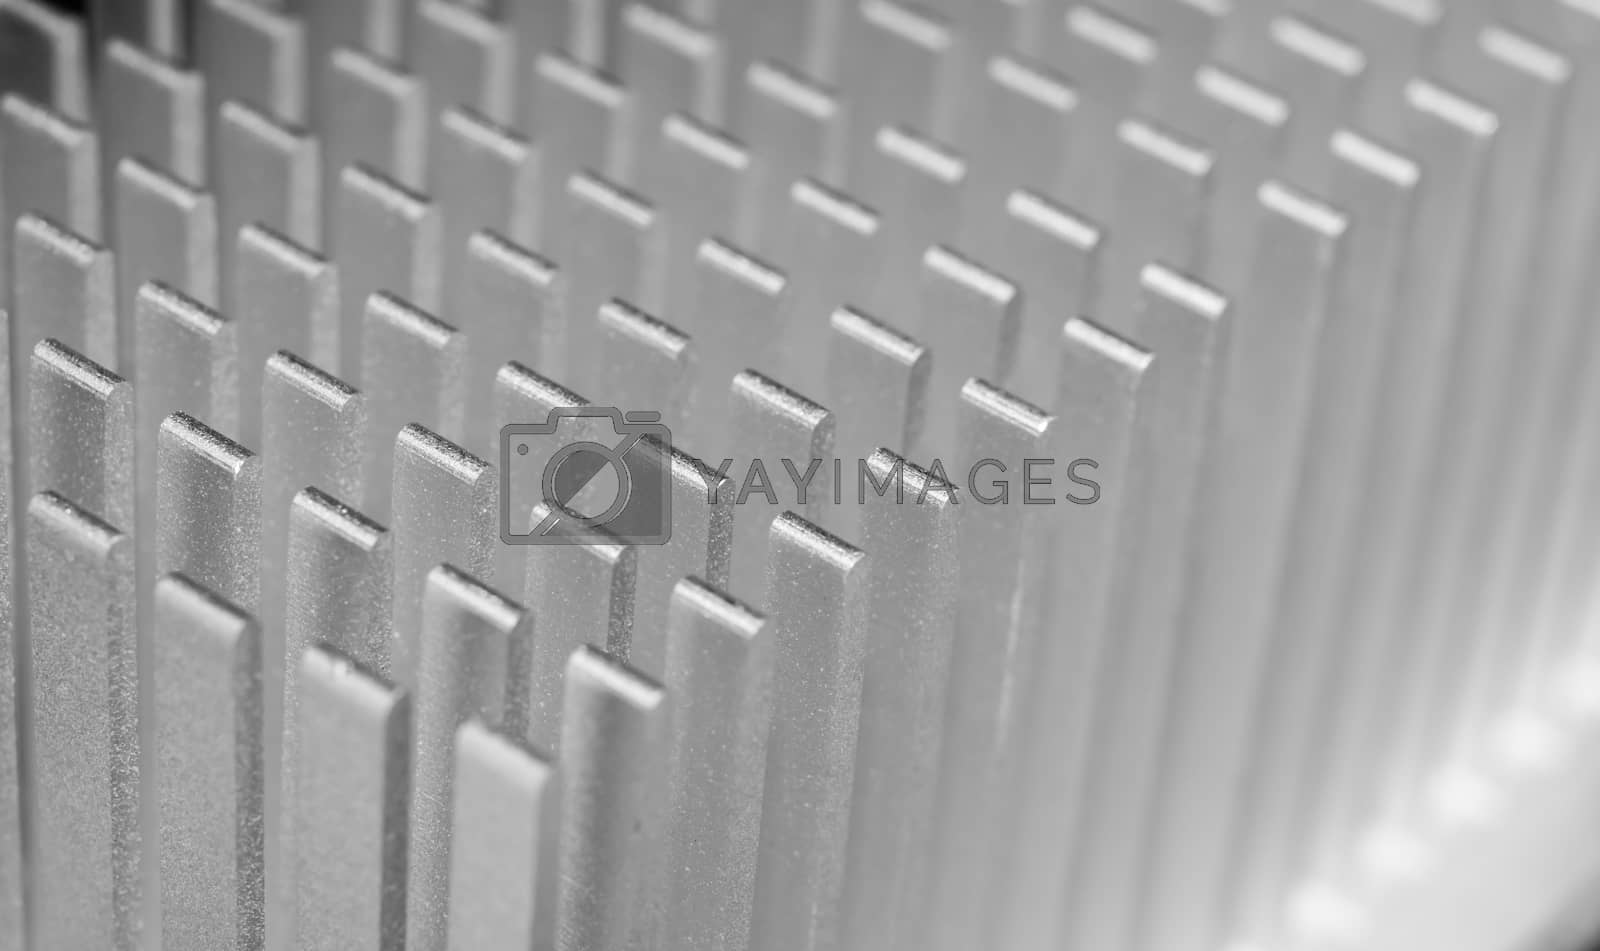 Royalty free image of computer heat sync or cooling fins by TravisPhotoWorks